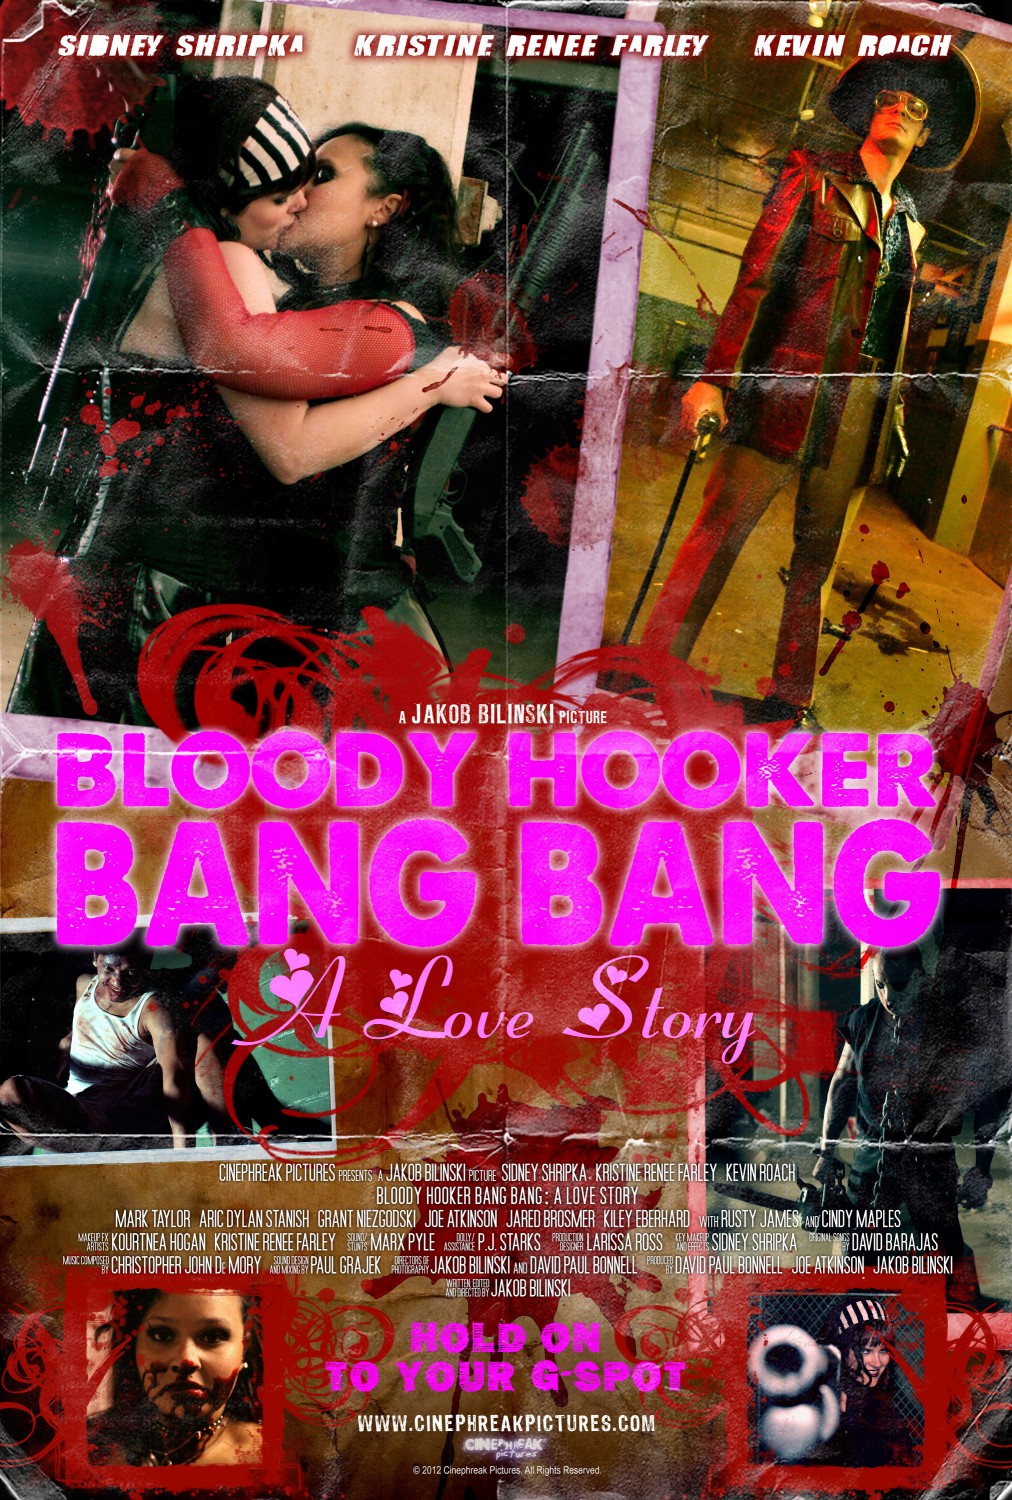 Extra Large Movie Poster Image for Bloody Hooker Bang Bang: A Love Story